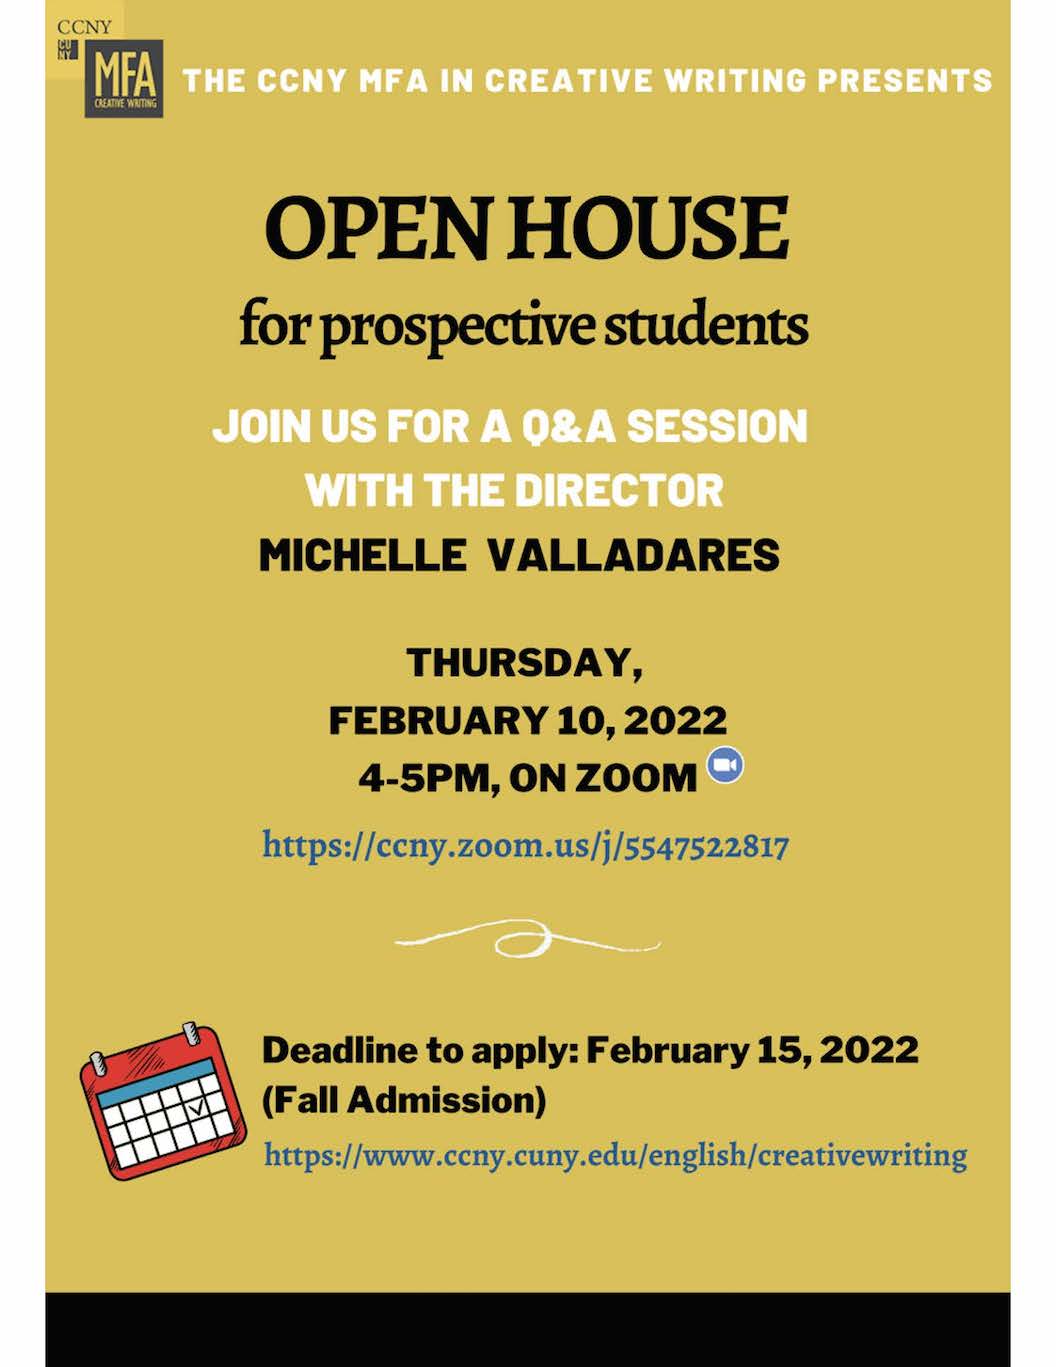 Open house for prospective students